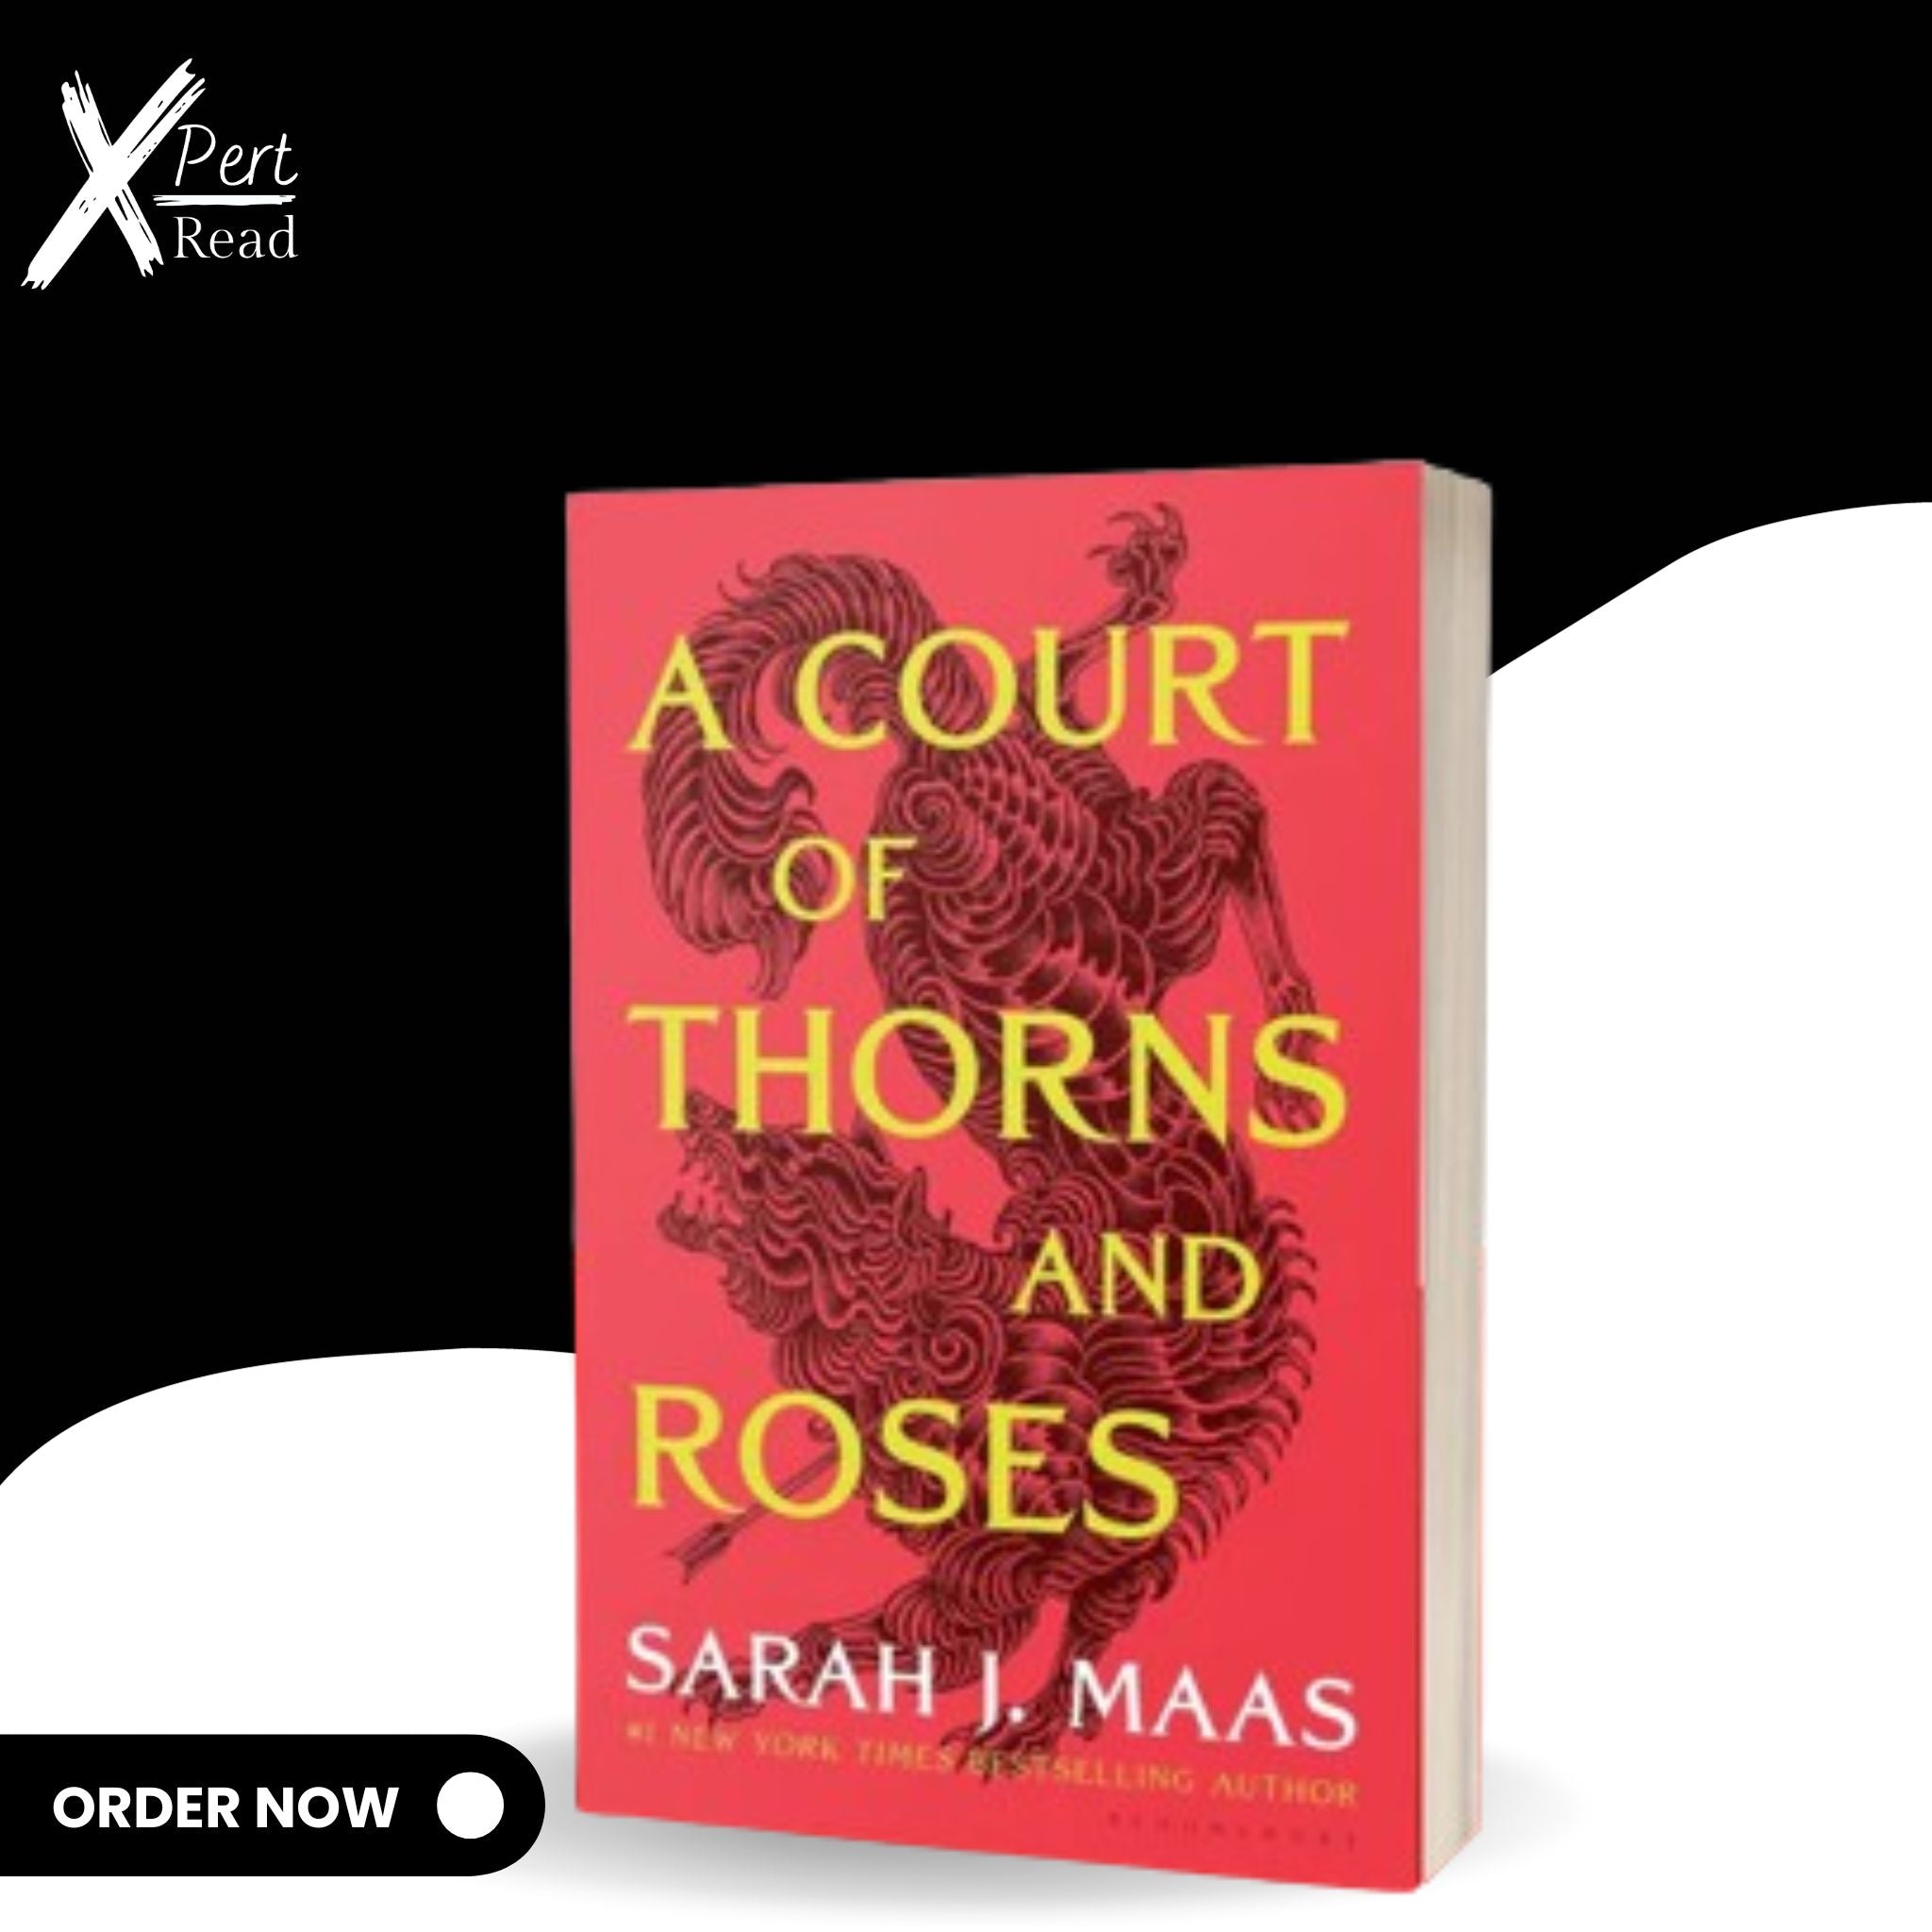 A Court Of Thorns And Roses (A Court Of Thorns And Roses, Book 1) By Sarah J. Maas ( Hardcover)